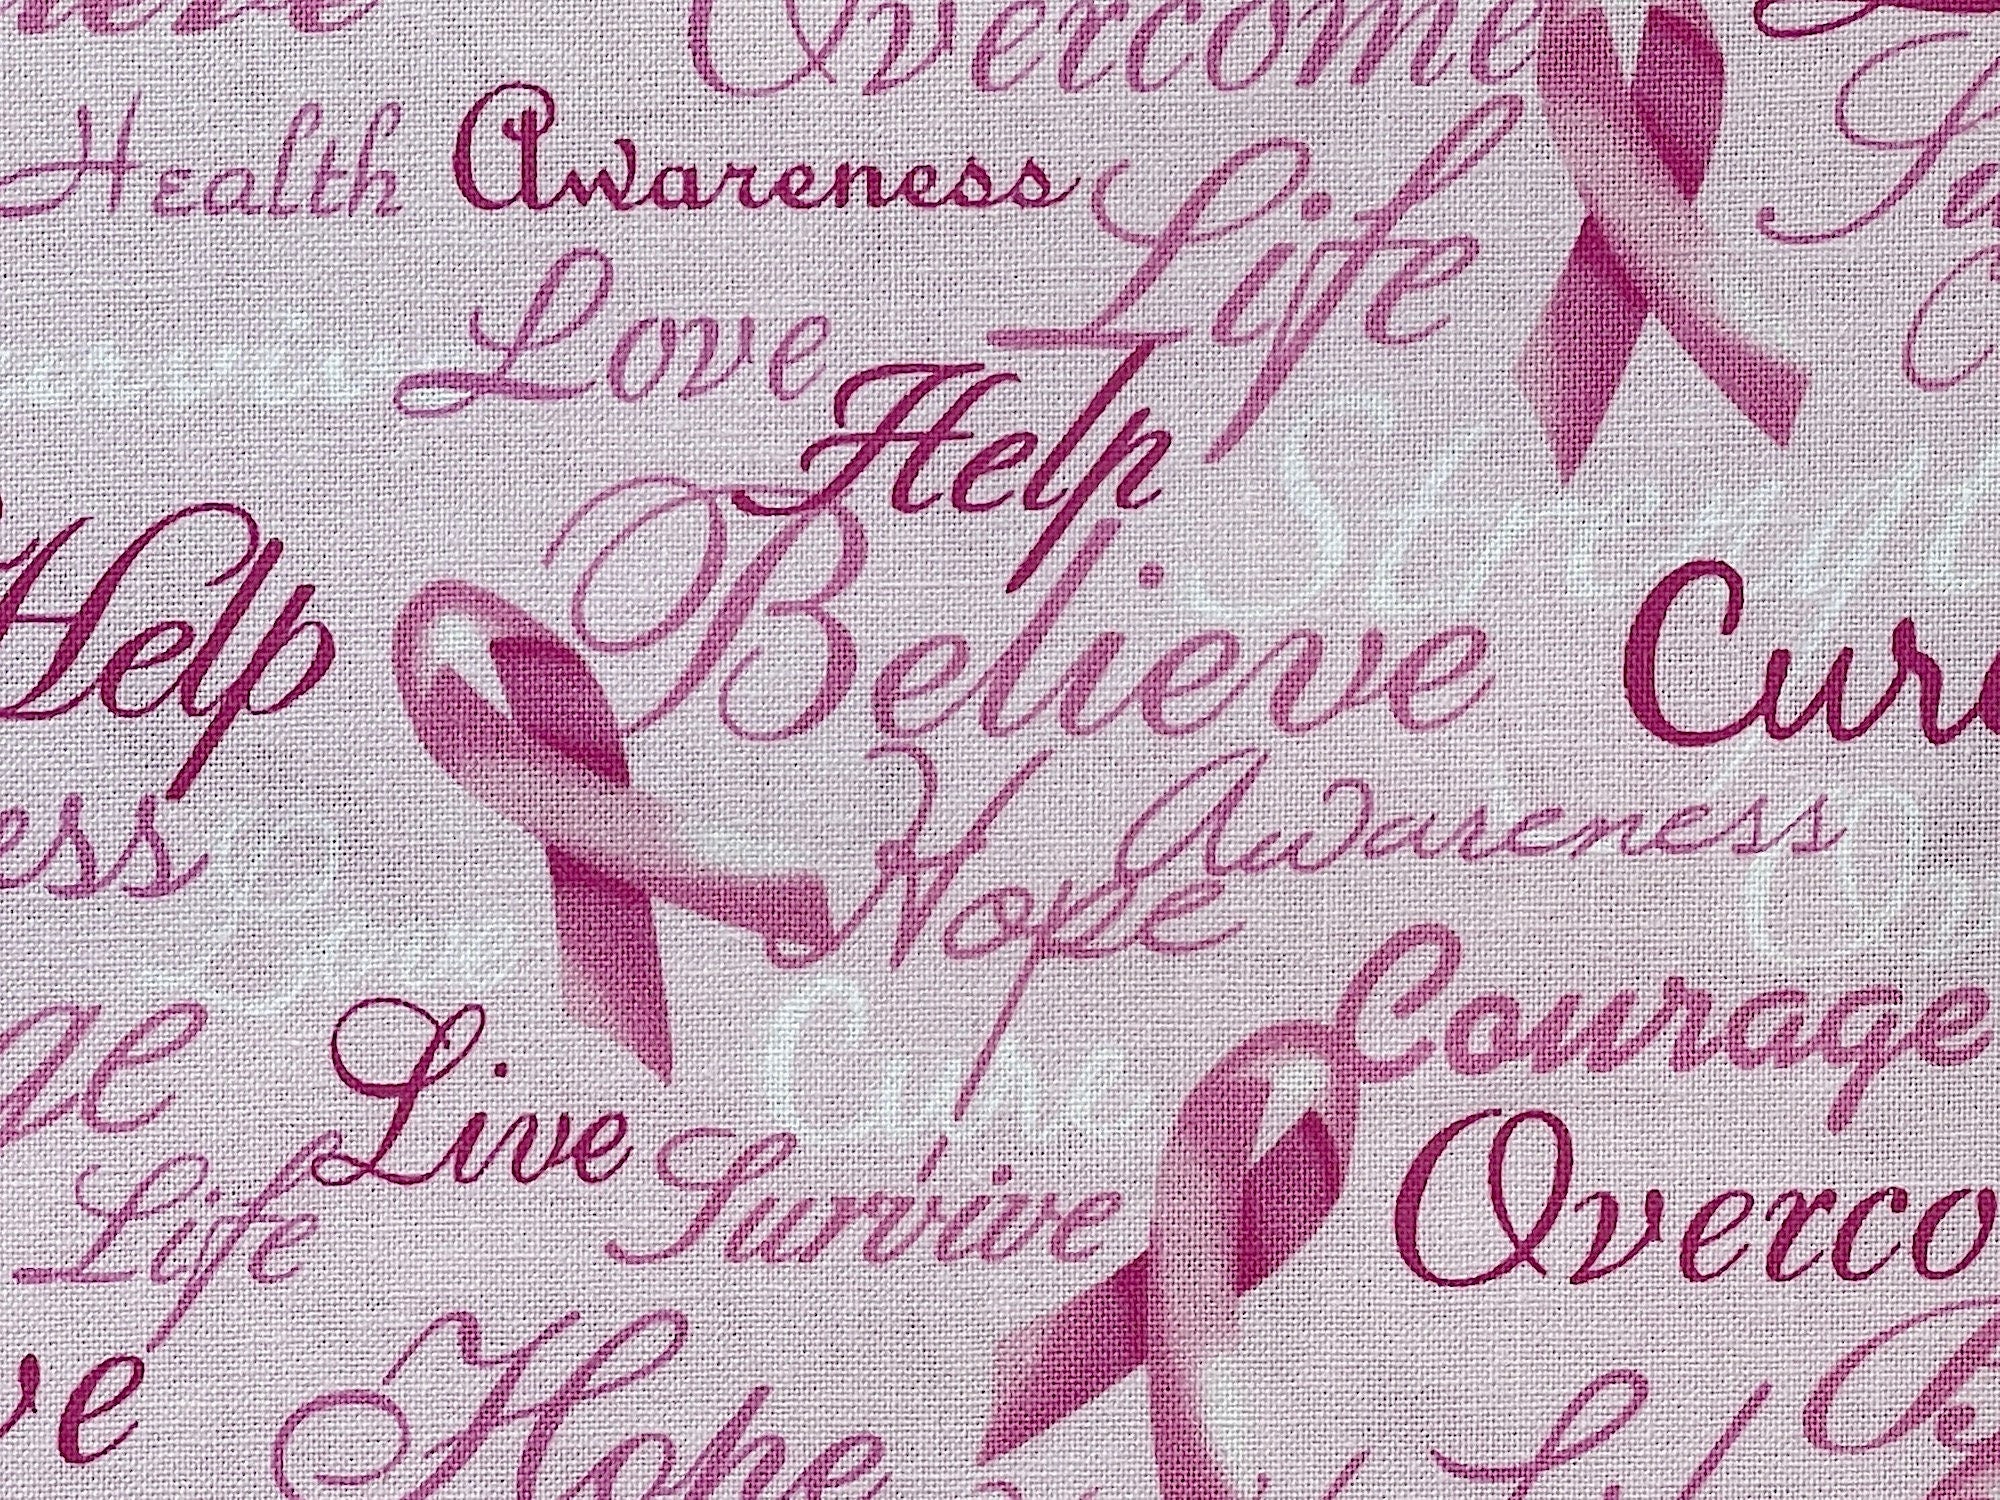 Light pink cotton fabric covered with words such as love, life, help, believe and more.